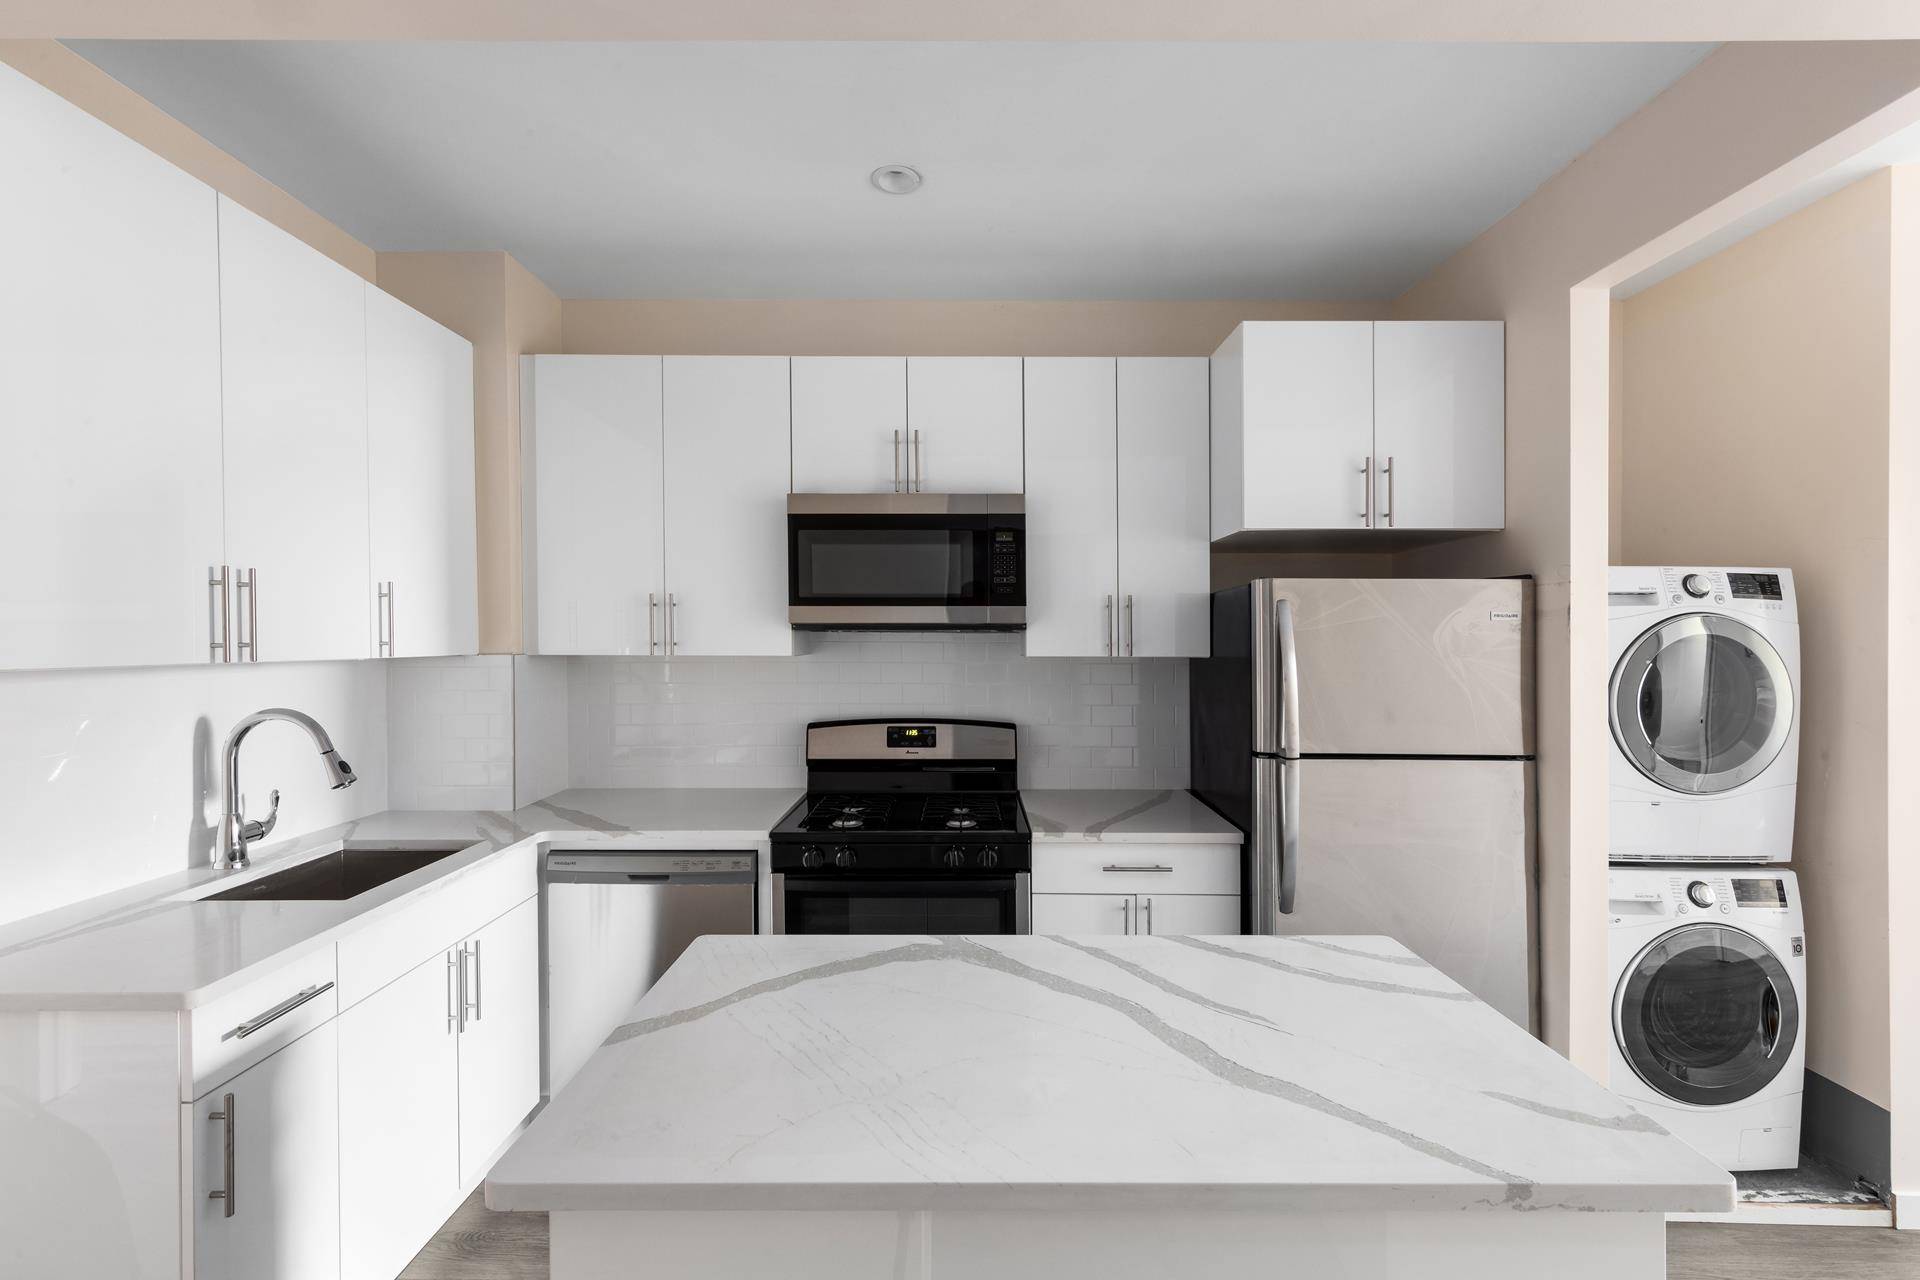 Mott Haven's newest luxury rental building Be the first to live in this oversized luxury 4 bedroom and 3 full bathroom residence, with high end appliances and finishes.